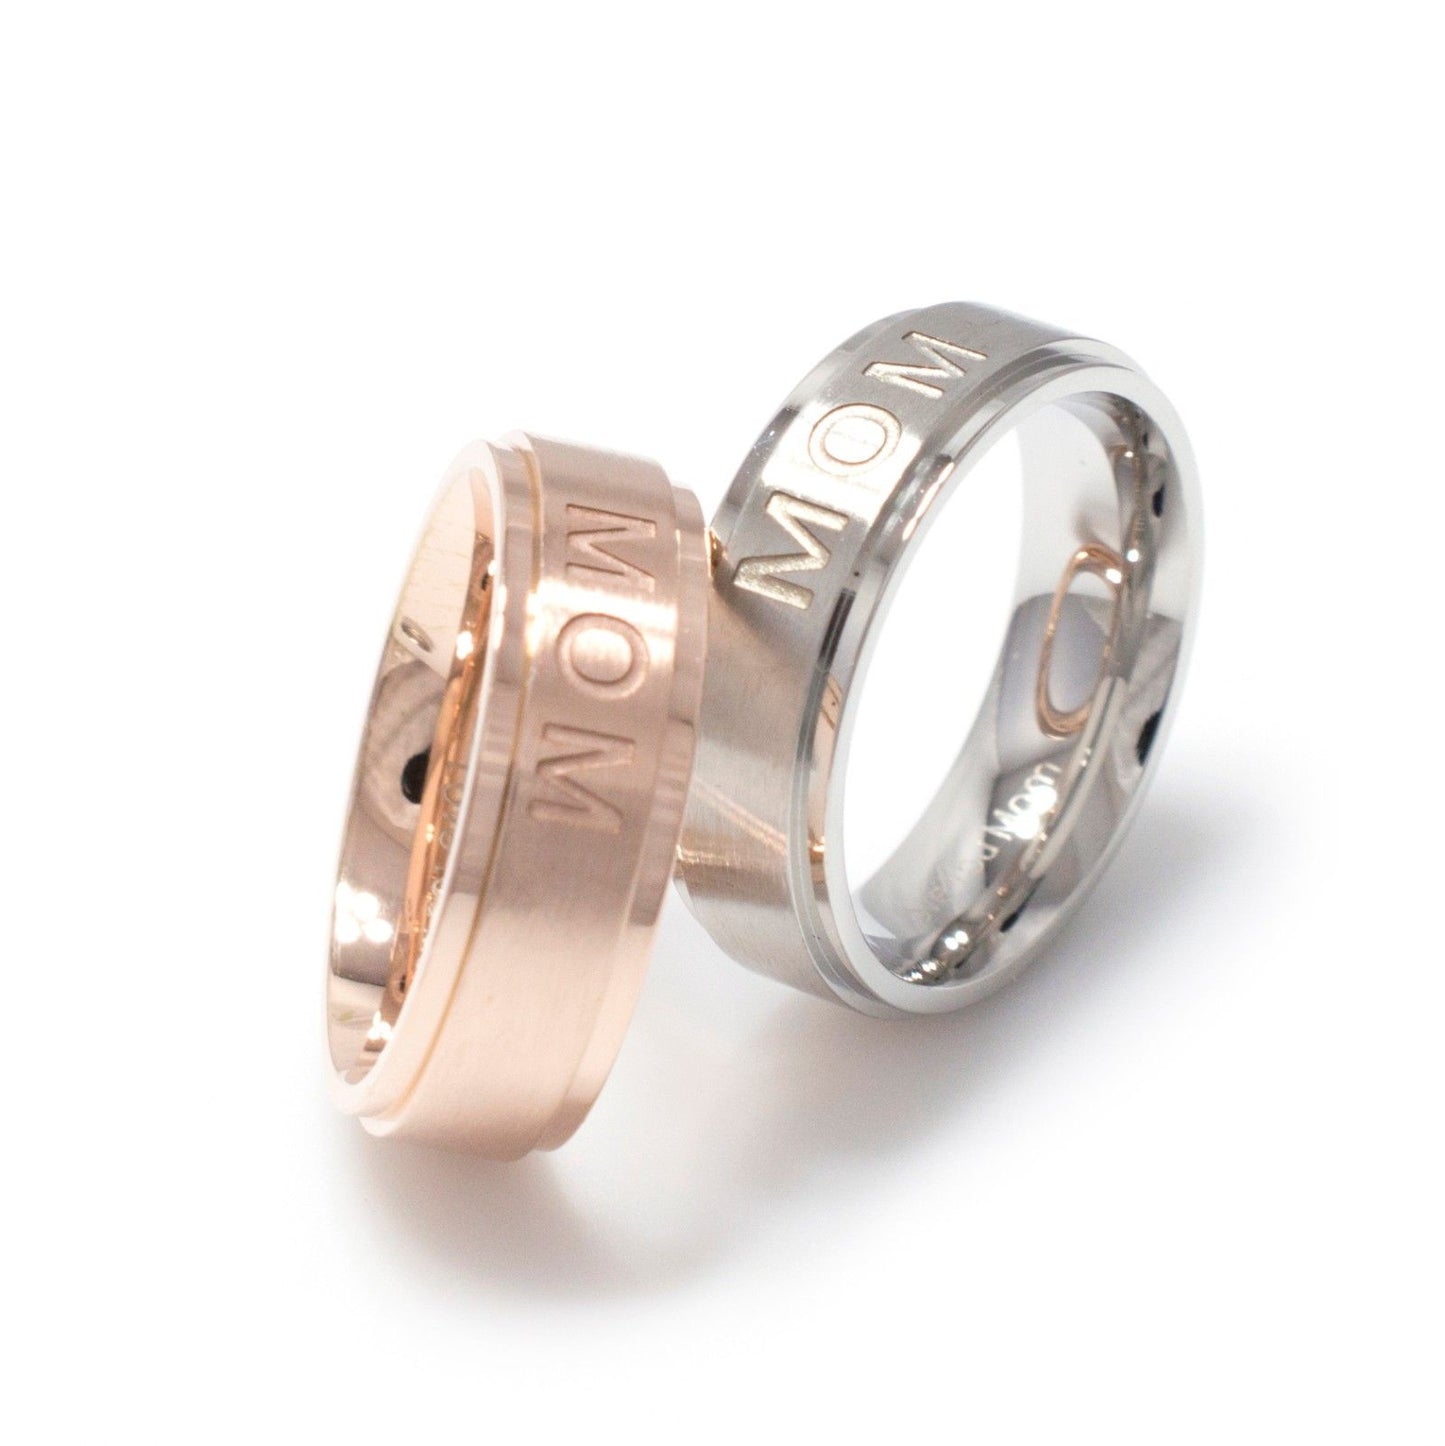 MOM Ring Stainless Steel Brushed Jewelry Size 5-9 6mm Silver or Rose Gold Tone